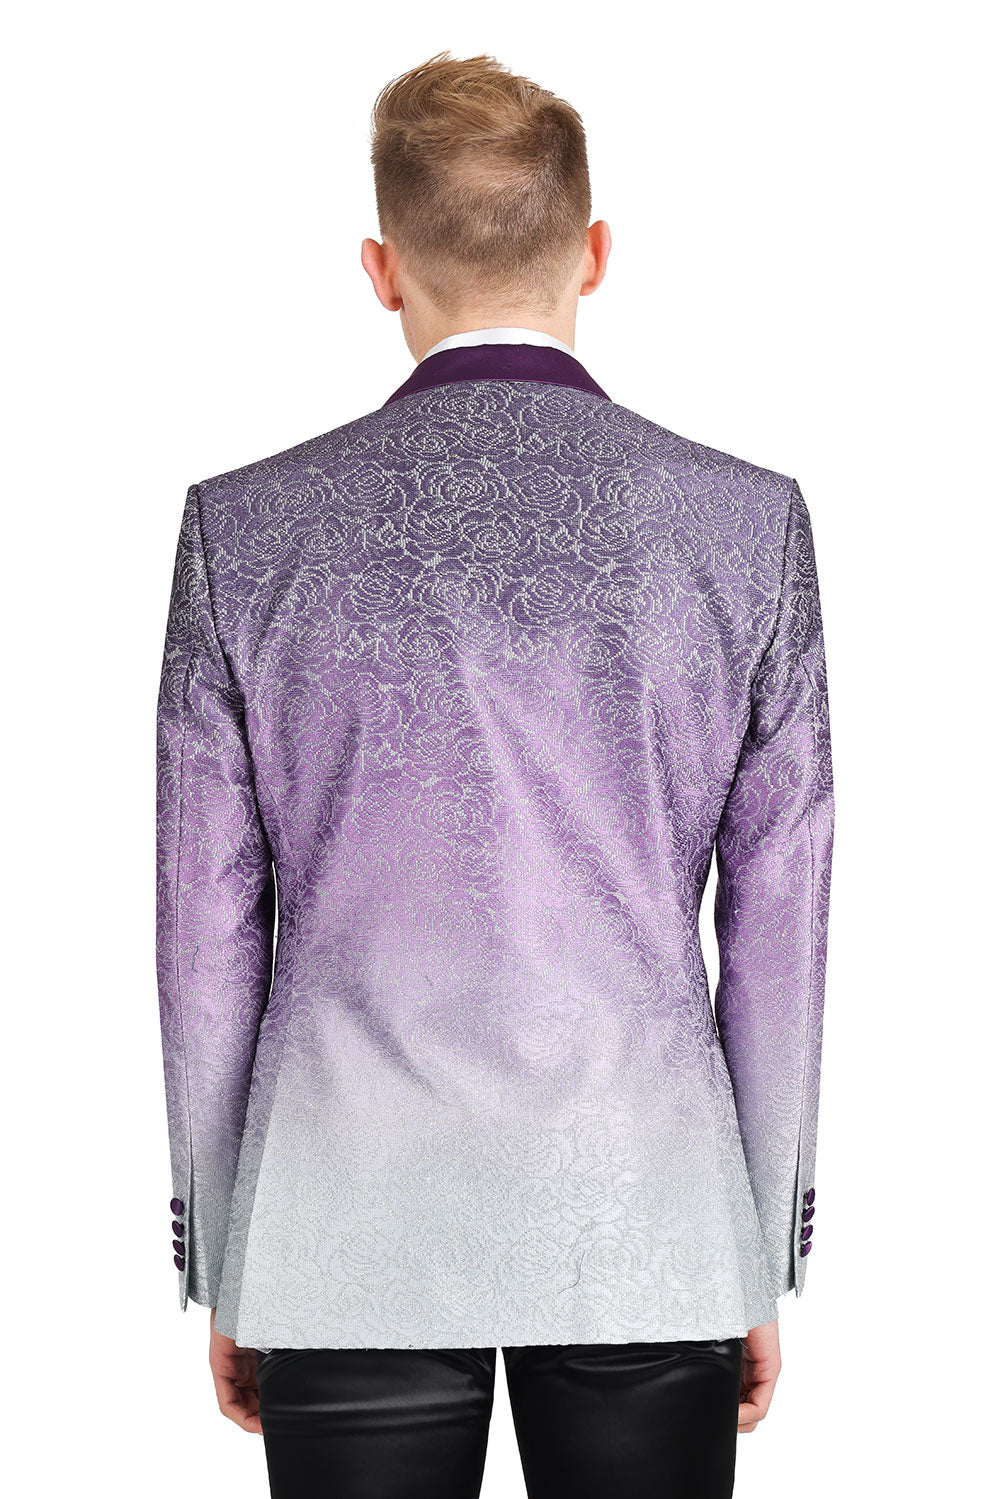 A stylish high school student wearing KCT Menswear's Dazzling Prom Blazer, showcasing its stunning two-tone purple fading effect, silver floral pattern, and gradient design - perfect for a memorable prom night.